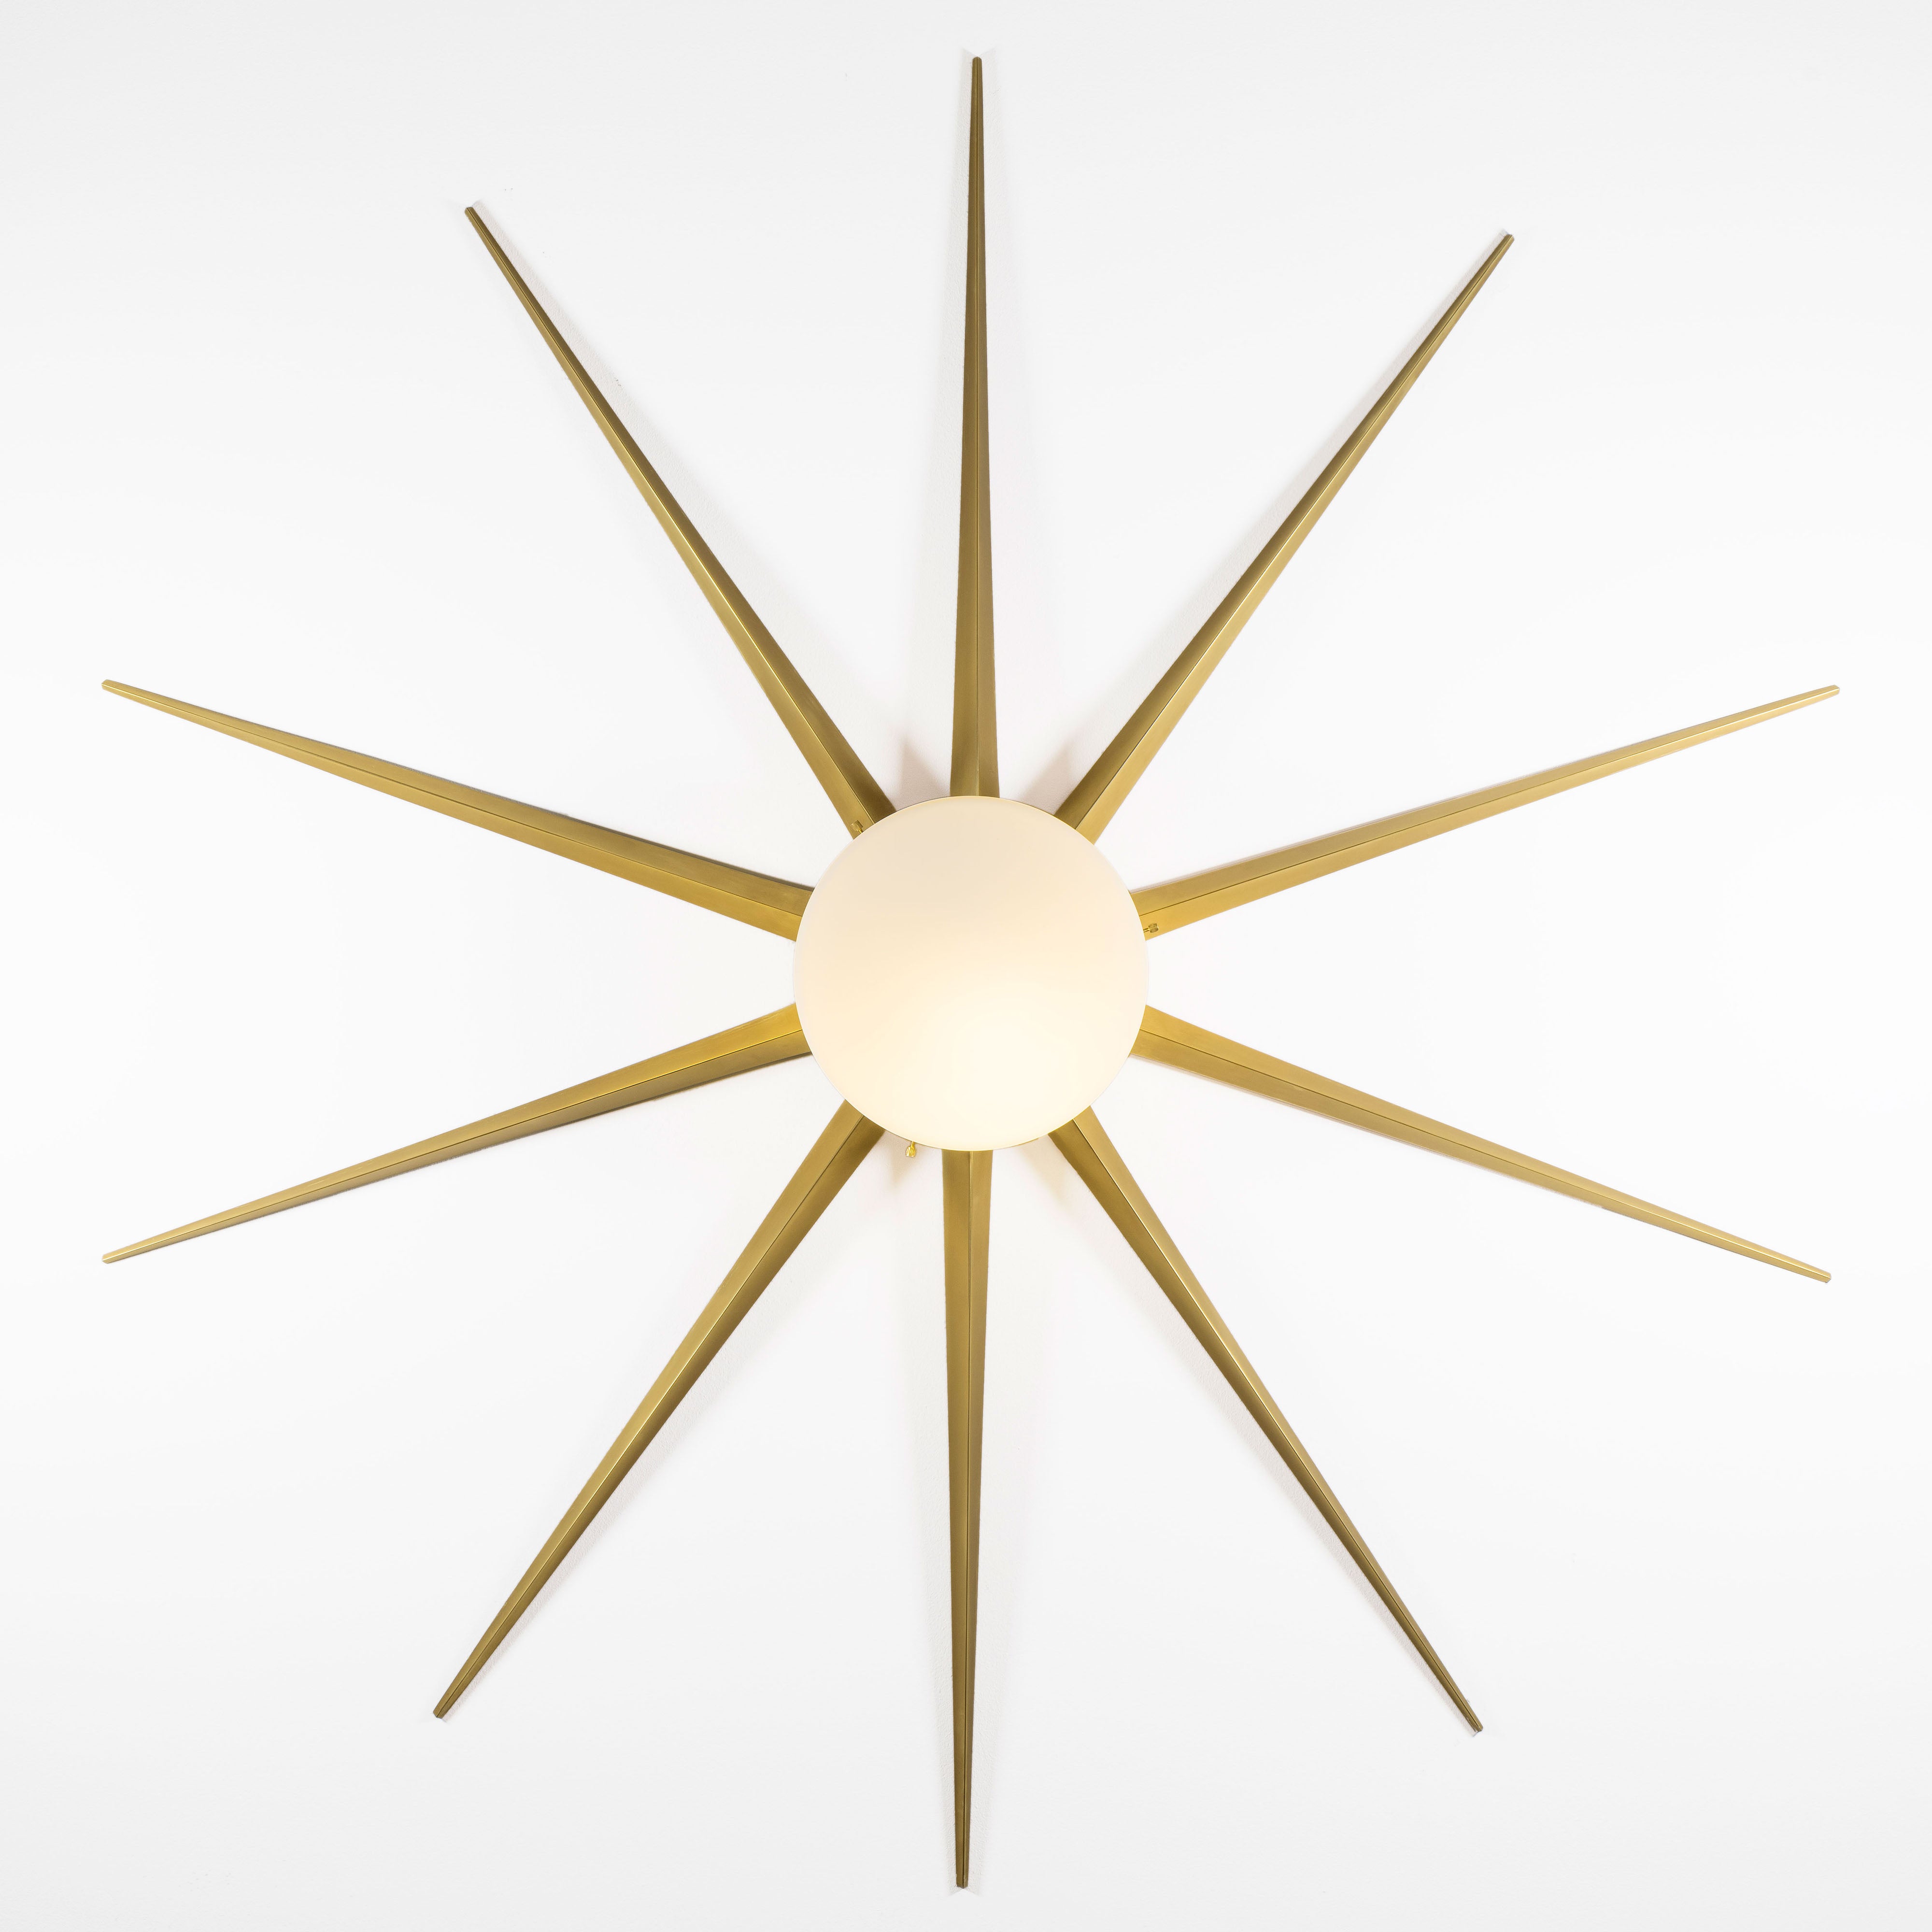  10 brass rays that radiate from an opaline Murano glass core. A tribute to the Sun, to Italian-made products and to the excellent Italian craftsmanship. Fireworks, like all the pieces in our collections, is handmade by our craftsmen, guided by an obsession for detail and the search for perfection.